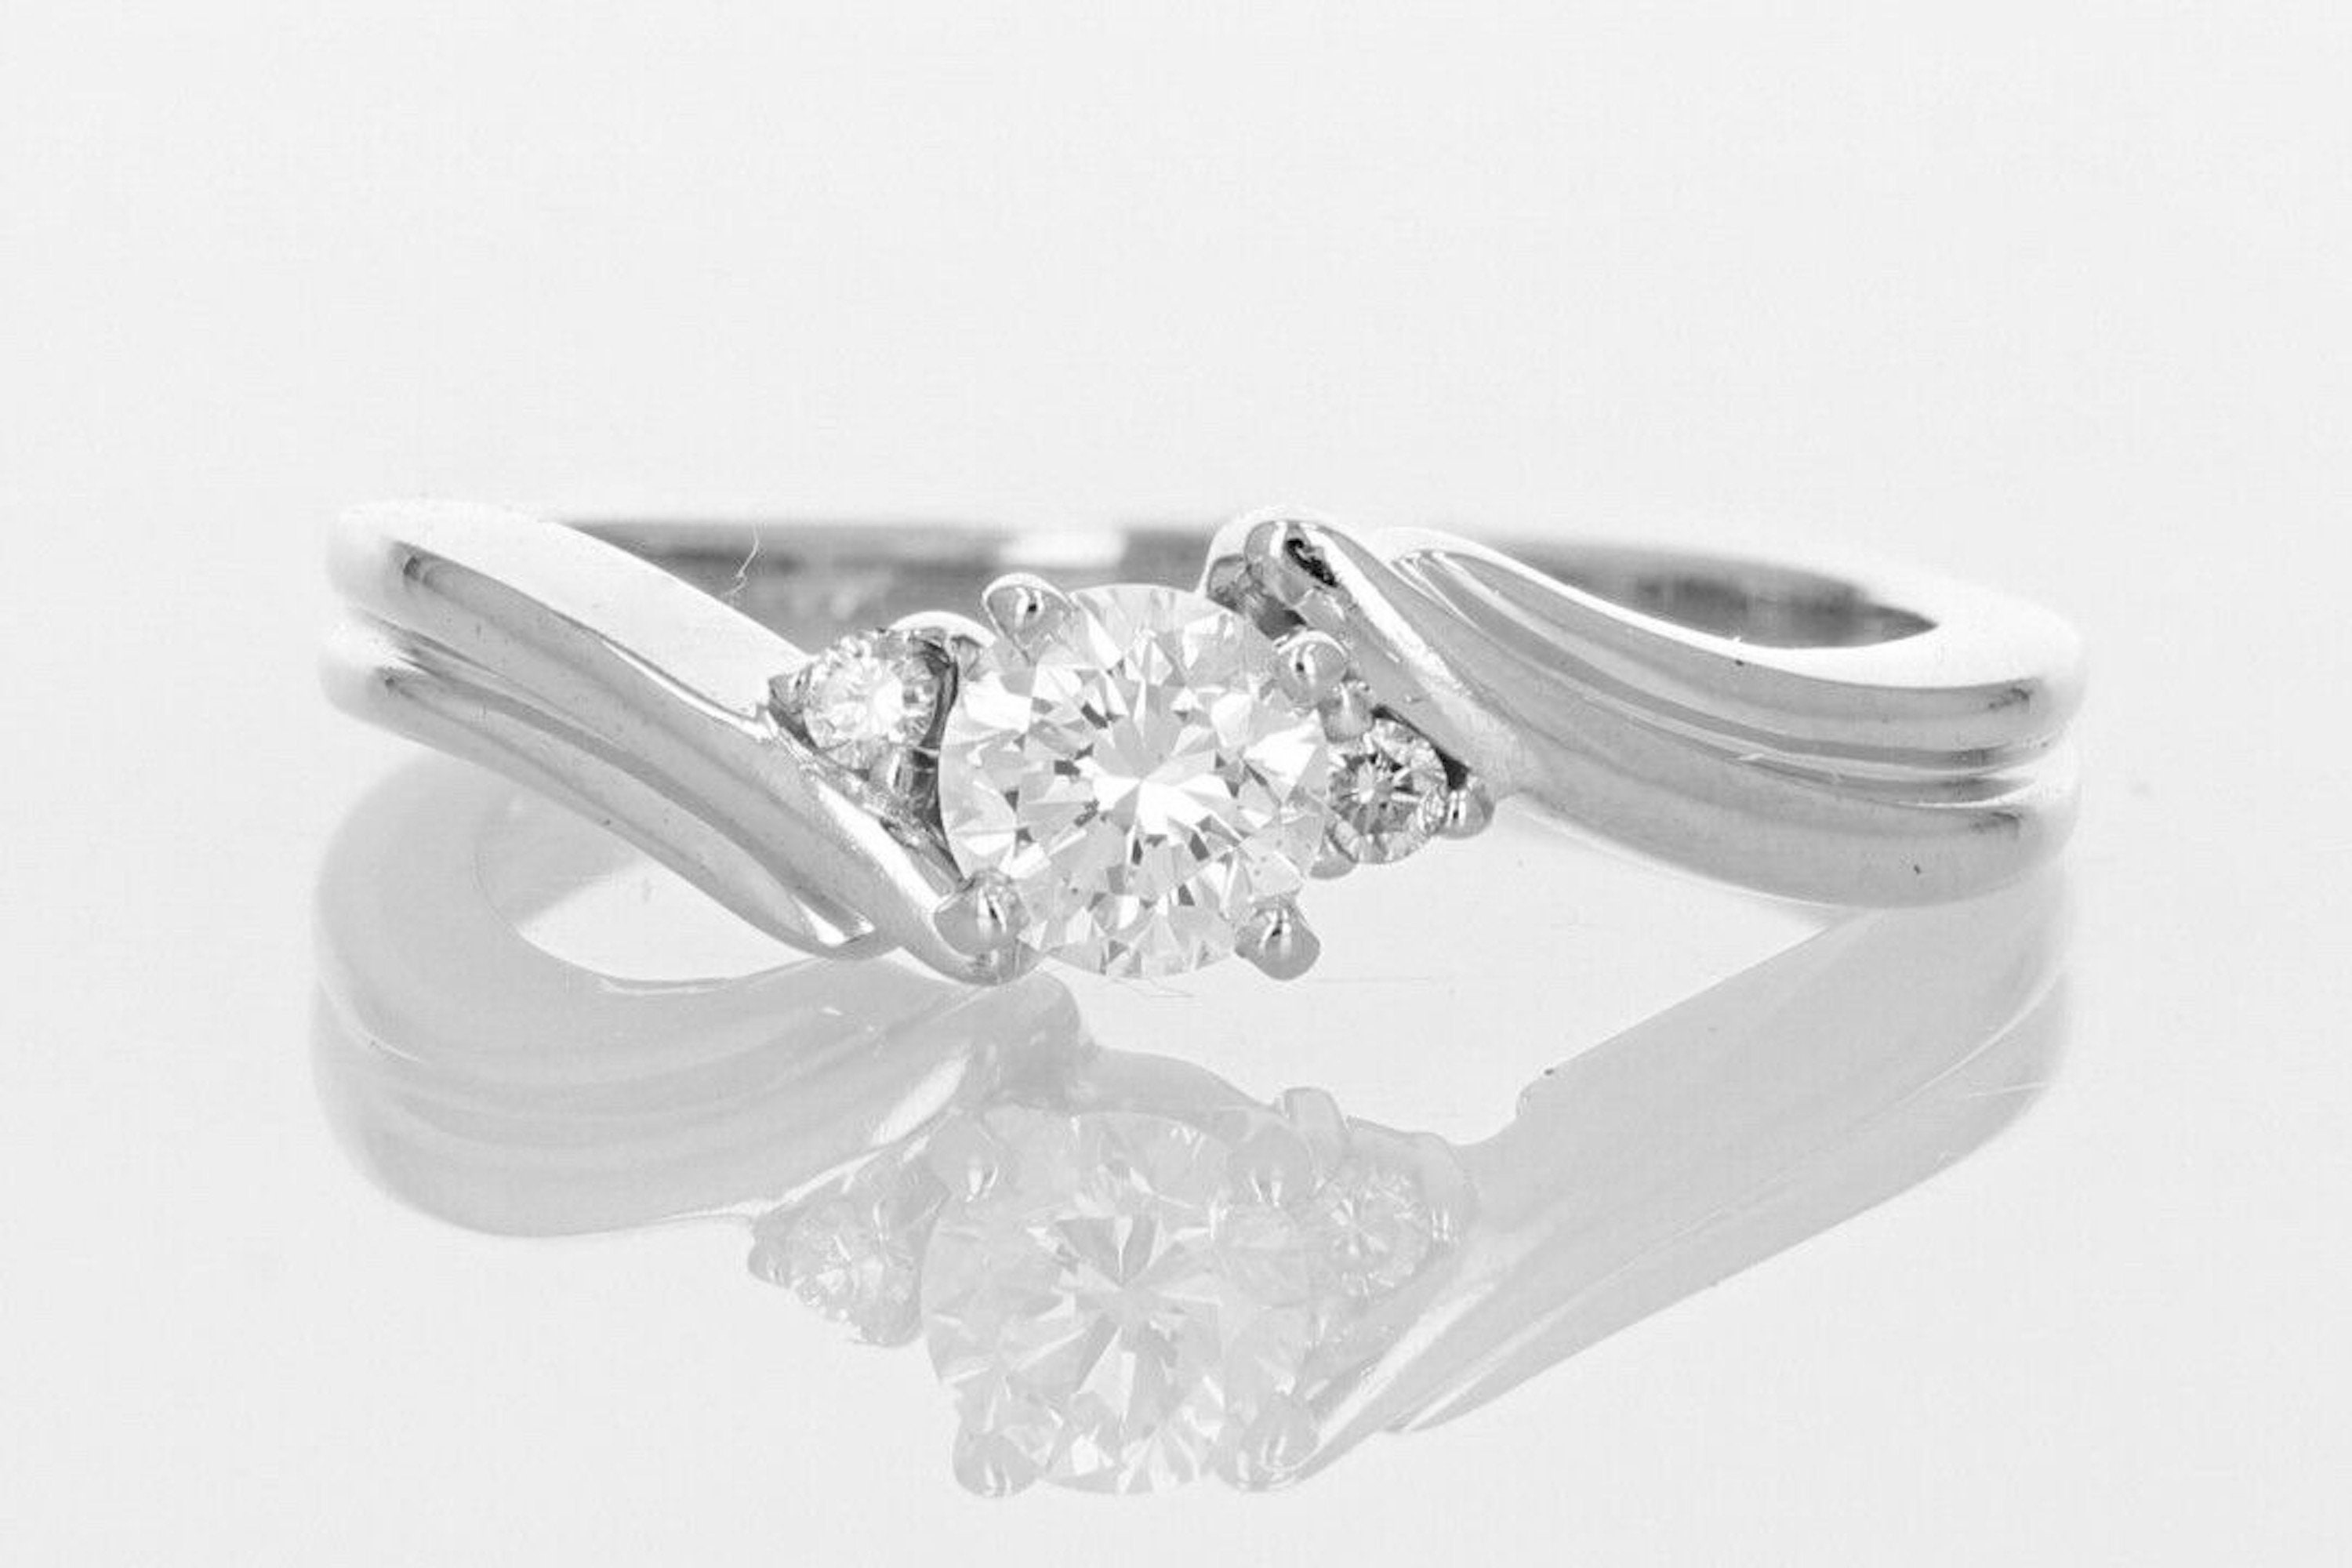 Solitaire Bypass Diamond Engagement Ring 14K White Gold (0.13ct)